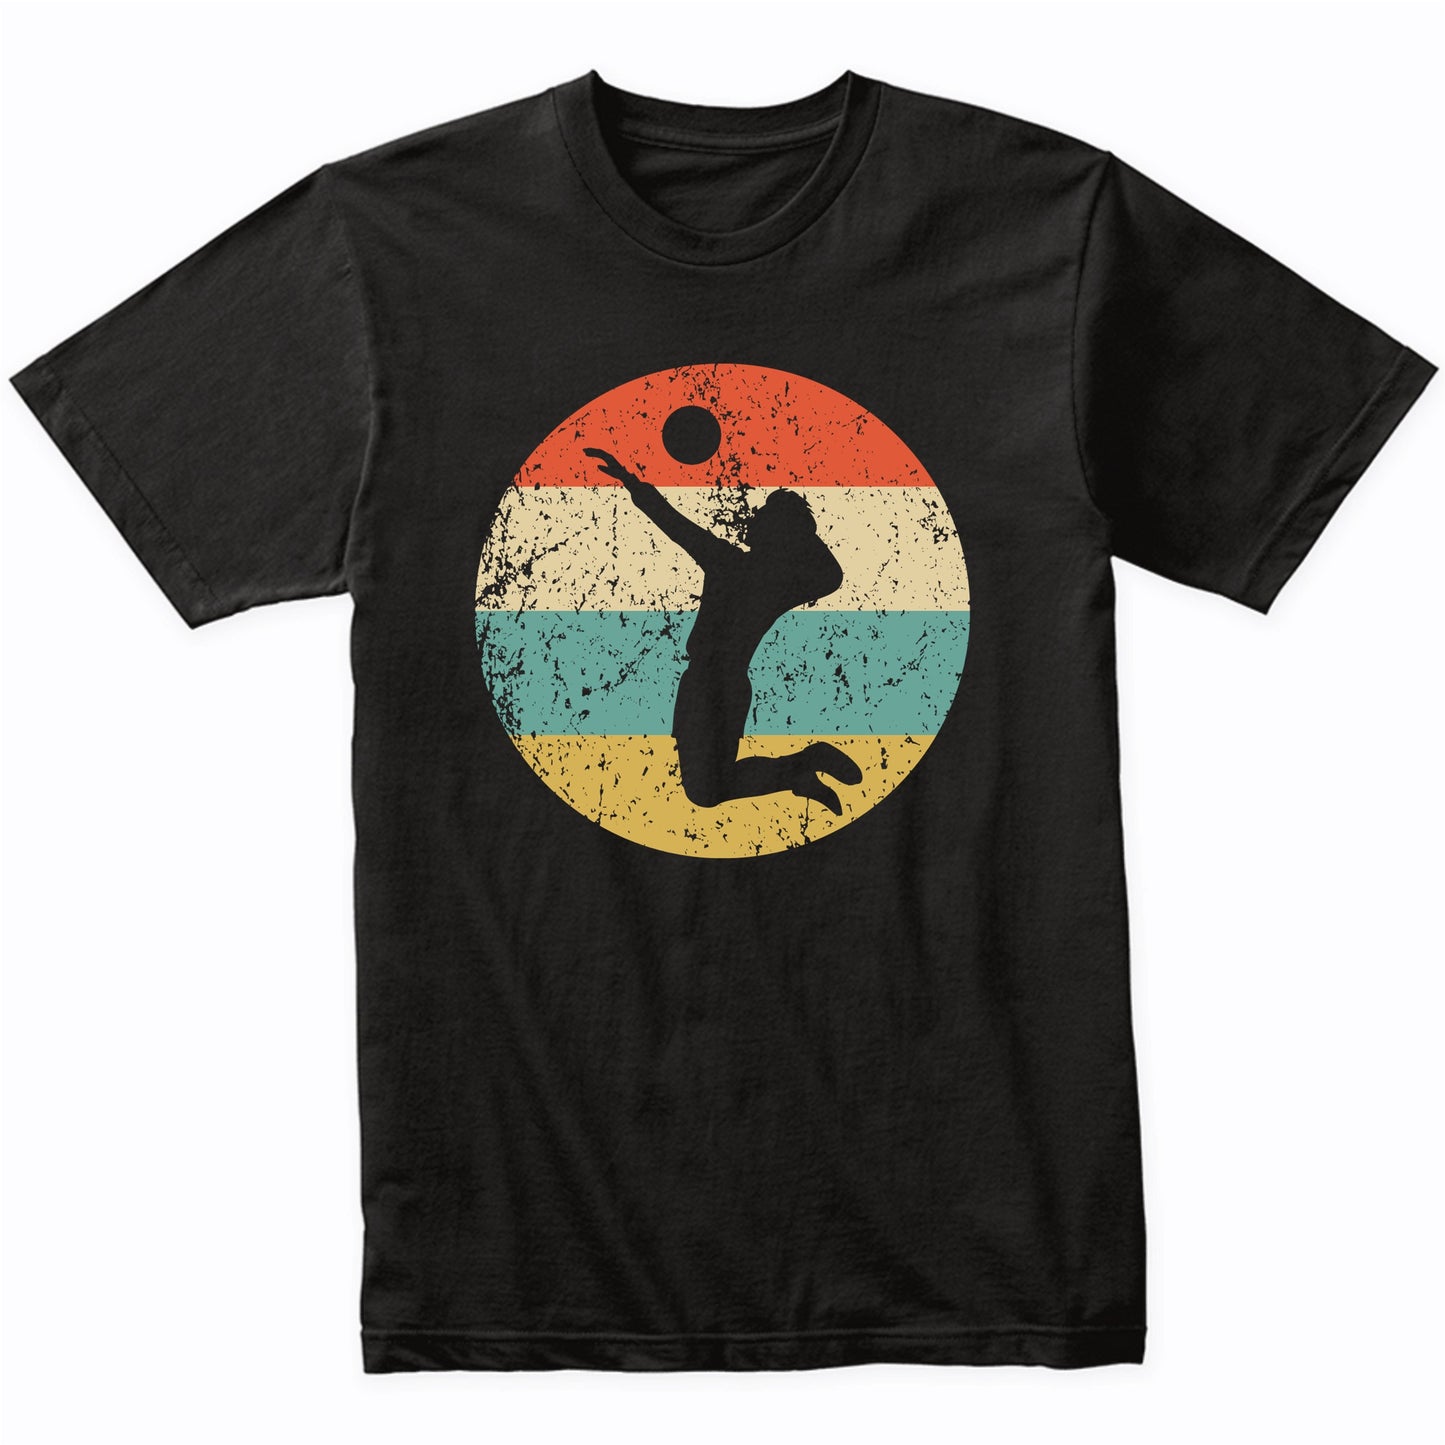 Volleyball Shirt - Vintage Retro Volleyball Player T-Shirt